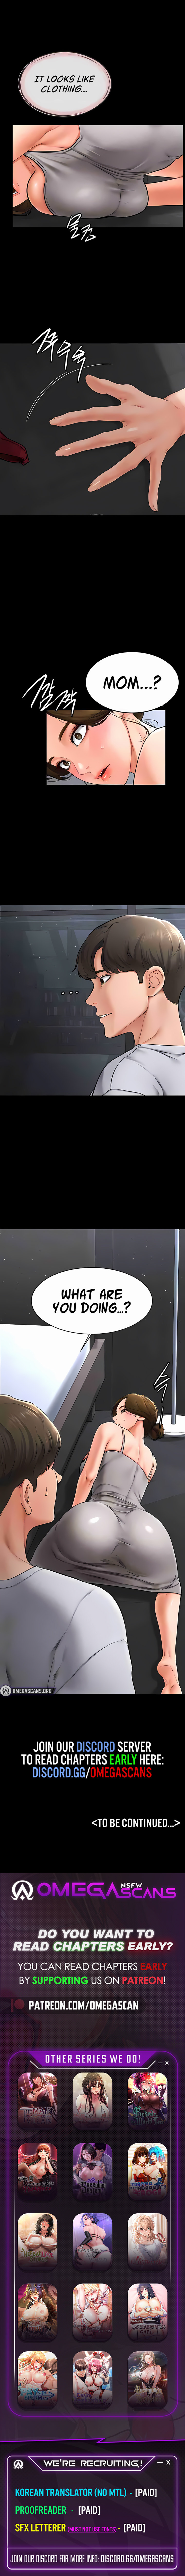 My New Family Treats me Well - Chapter 12 Page 11